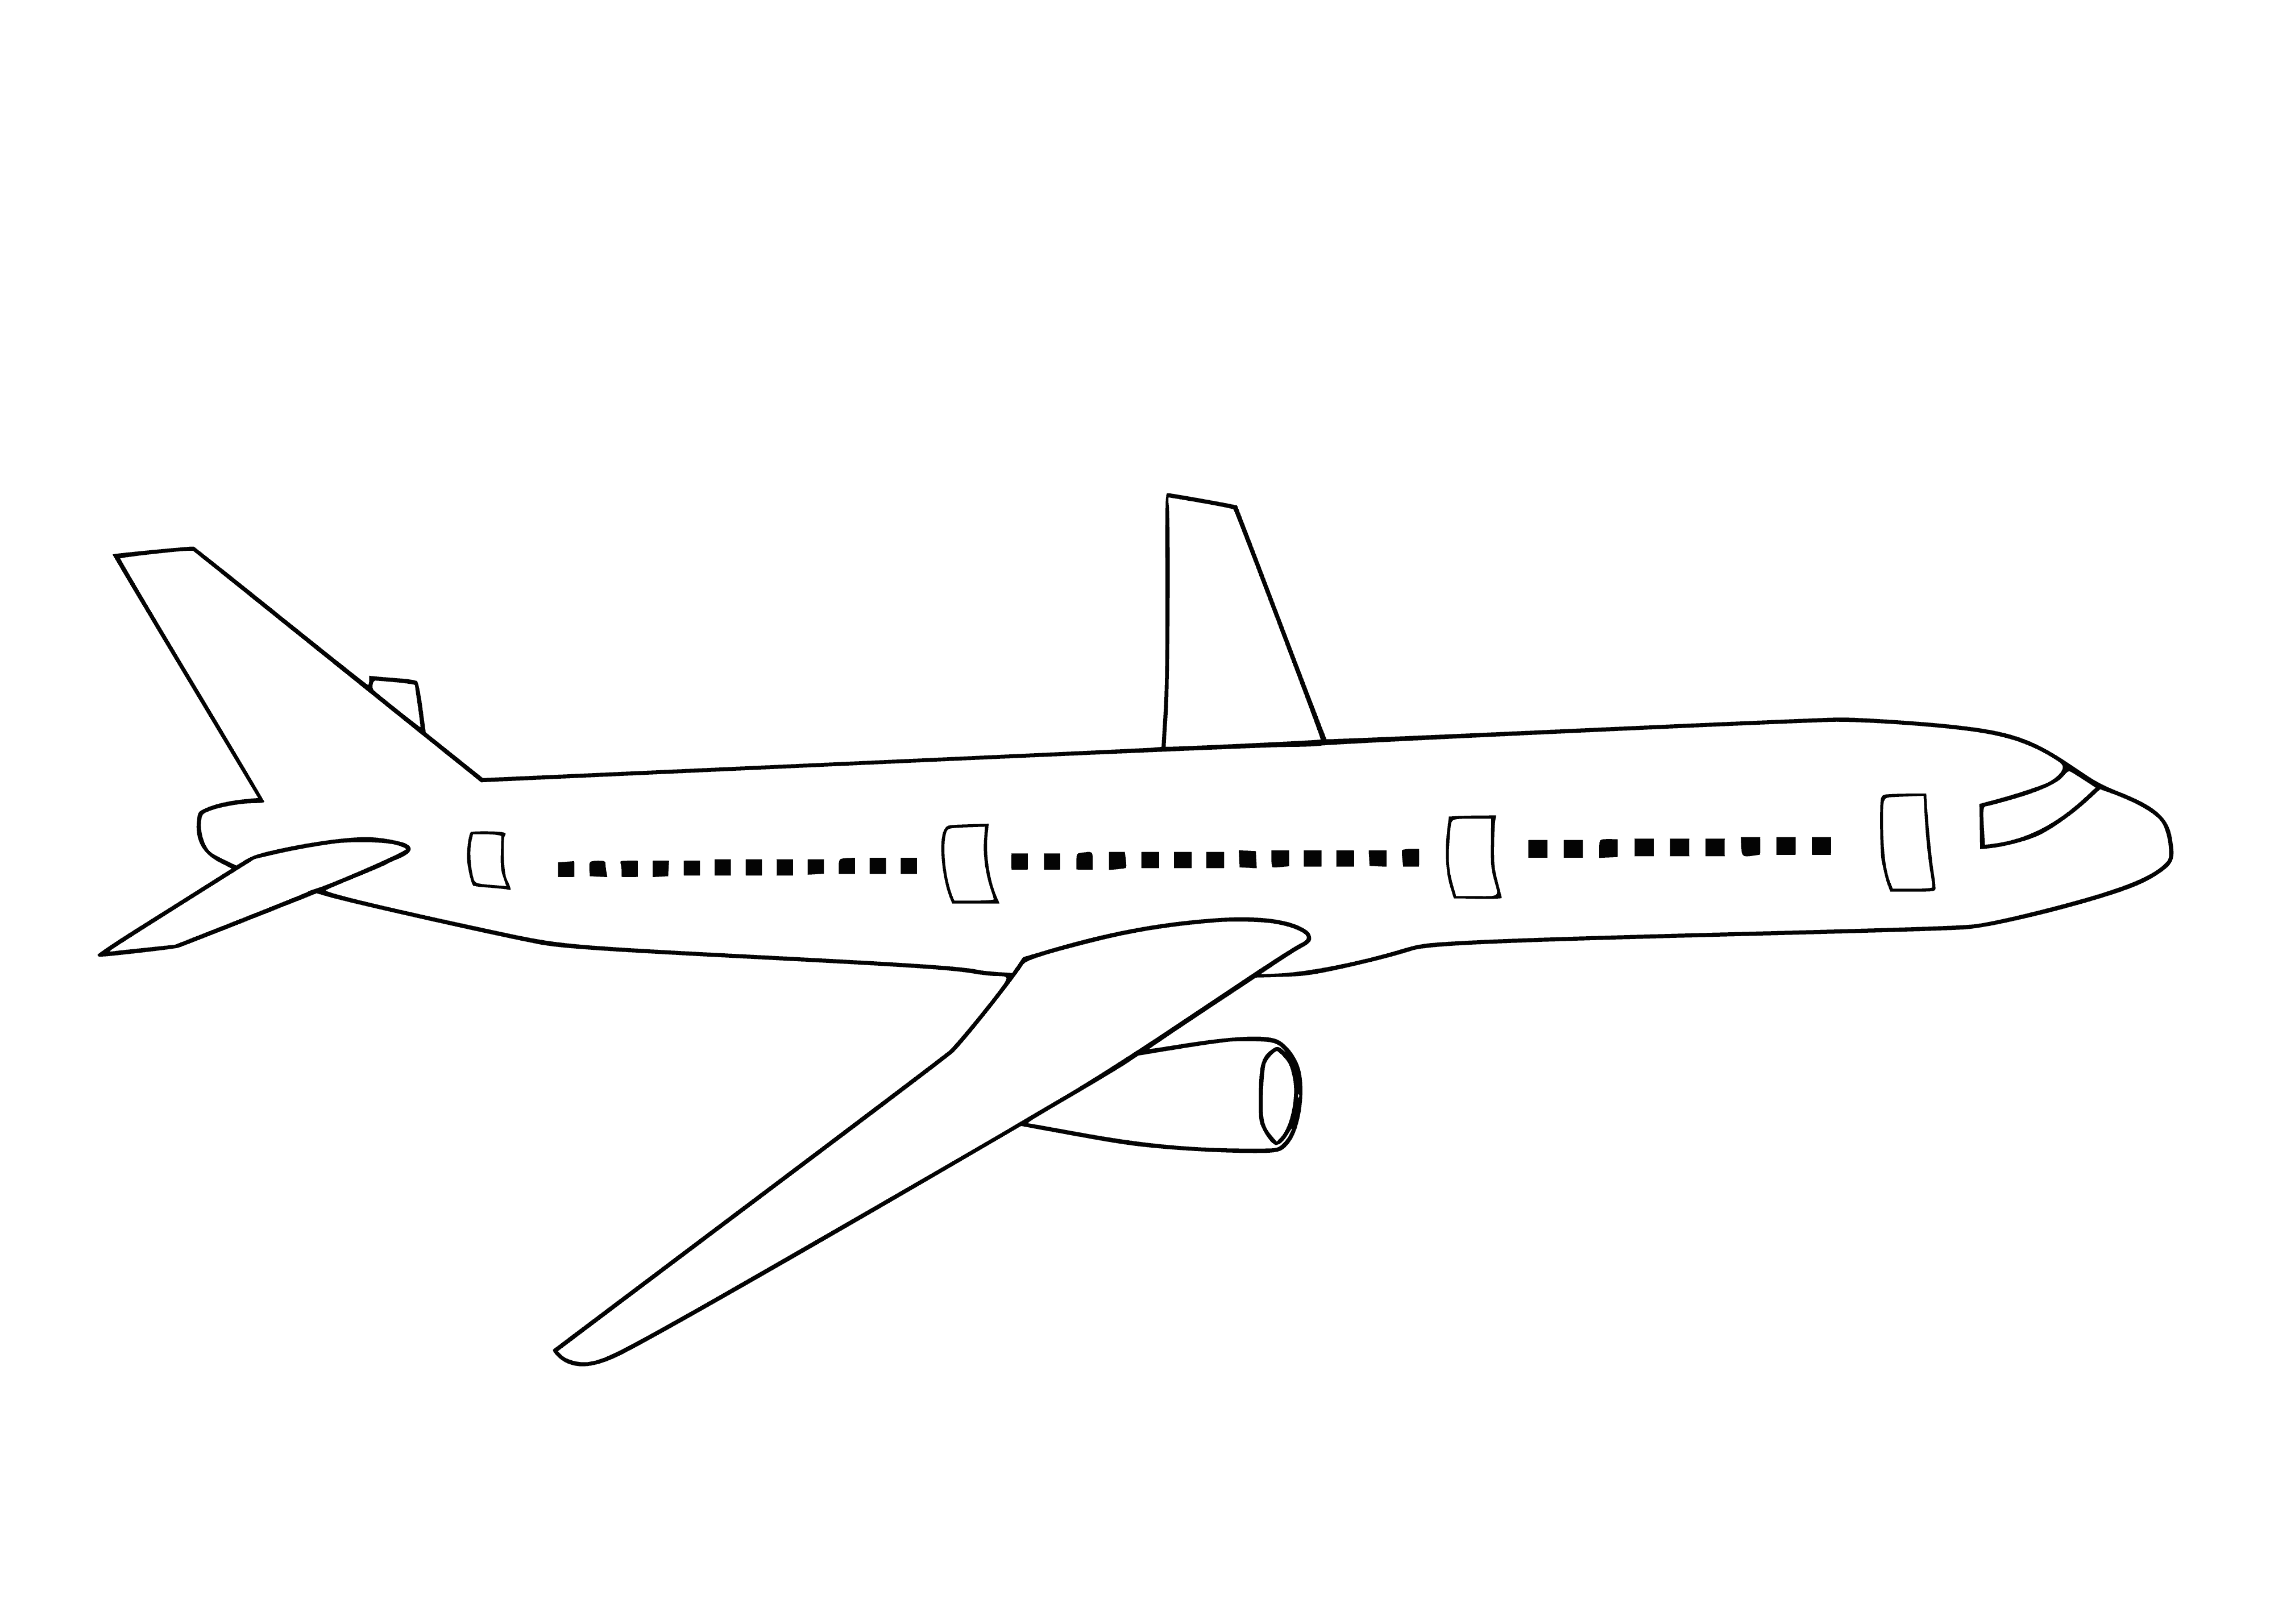 coloring page: Airliners: large, fixed-wing aircraft for transporting passengers/cargo, often wide-body jets for long-haul flights between major airports.